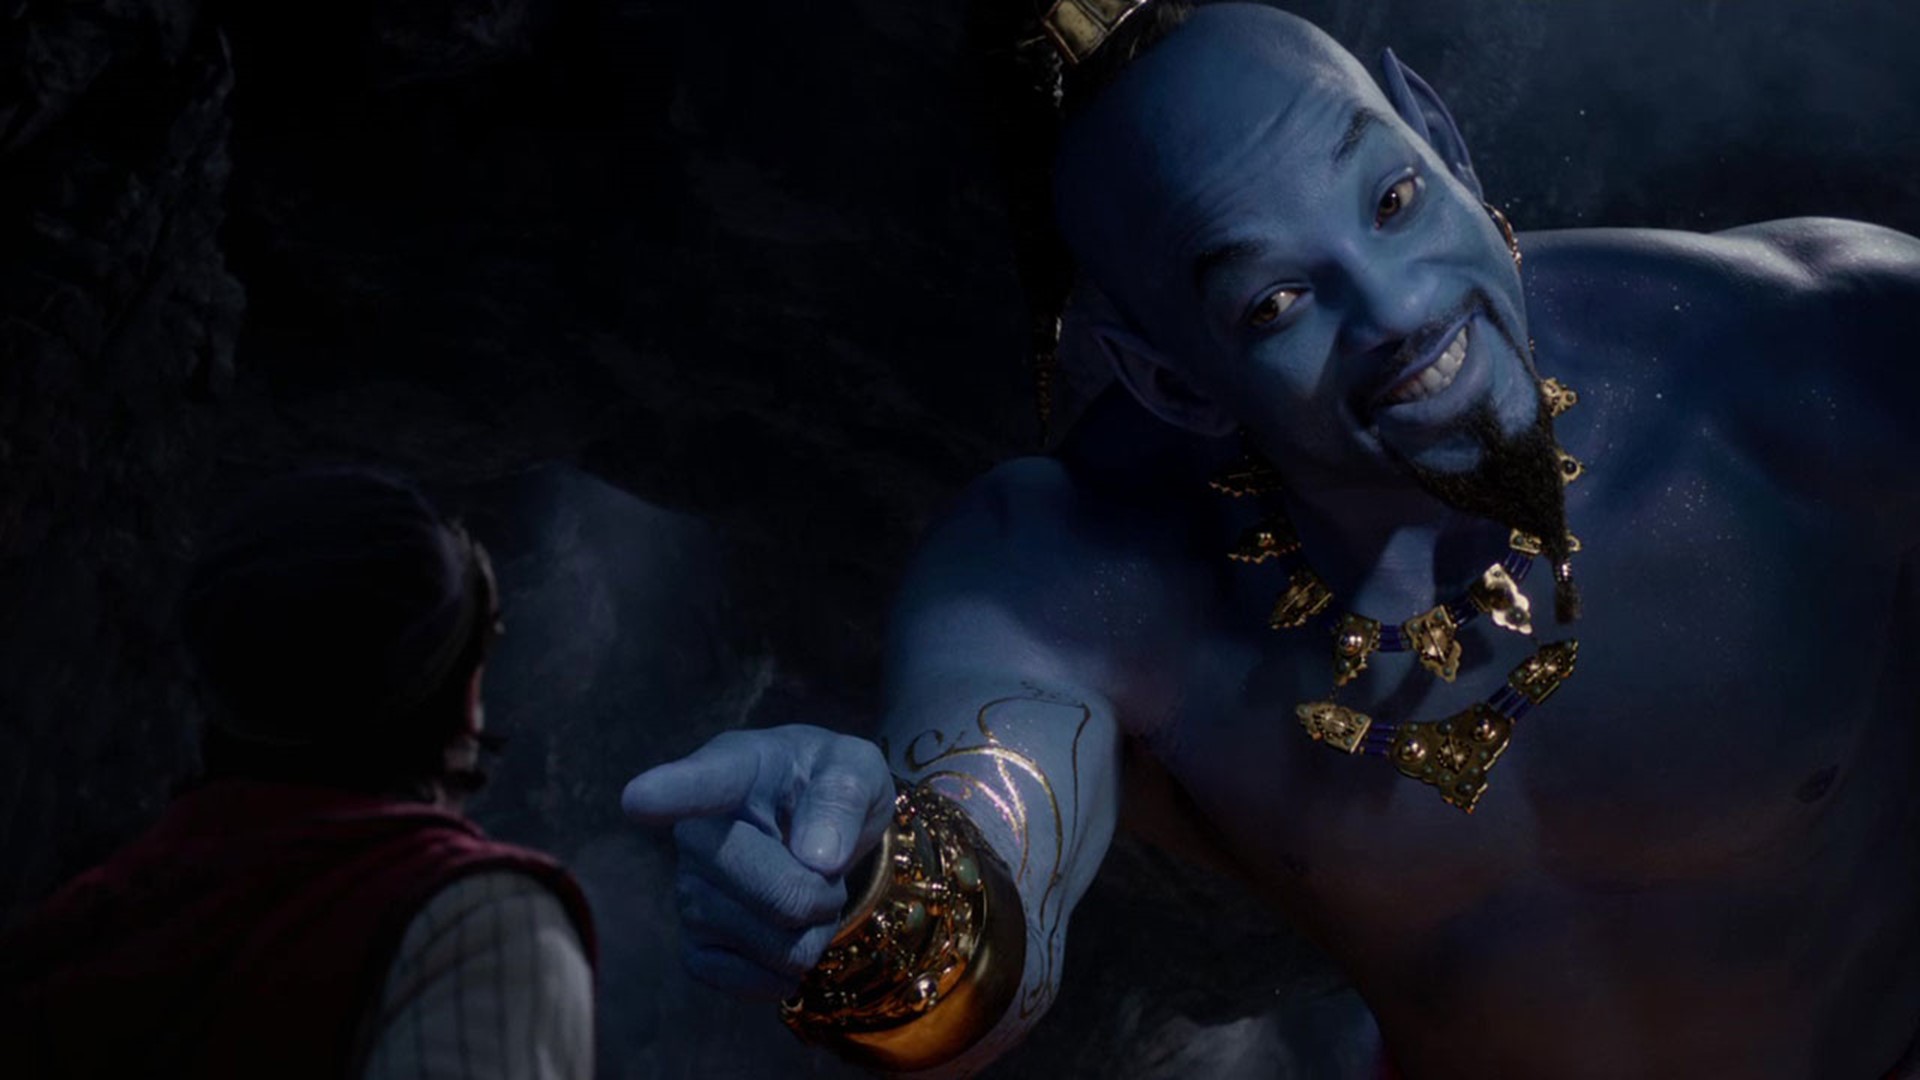 The trailer for Disney's upcoming live-action take on "Aladdin" features clips of classic songs 'Friend Like Me' and 'A Whole New World.' The retelling of Disney classic is directed by Guy Ritchie, and features Mena Massoud as Aladdin, Naomi Scott as Princess Jasmine and Will Smith as the genie.